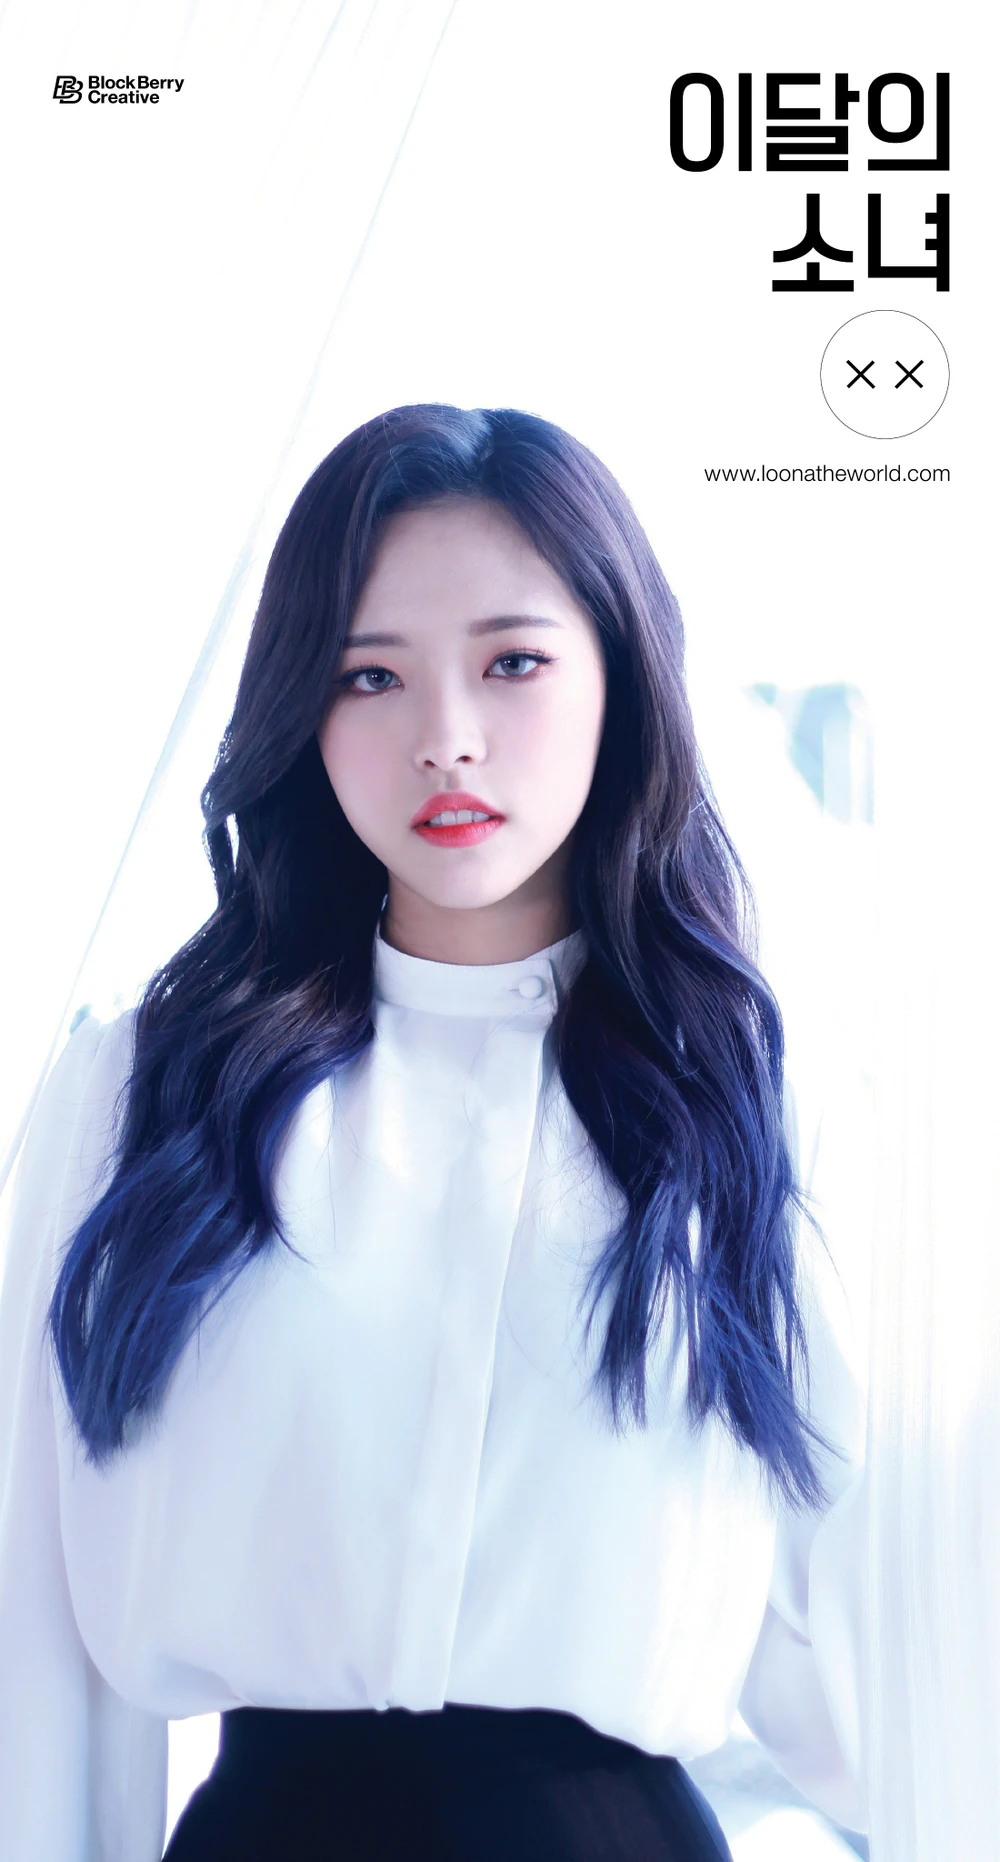 Loona XX Olivia Hye Concept Teaser Picture Image Photo Kpop K-Concept